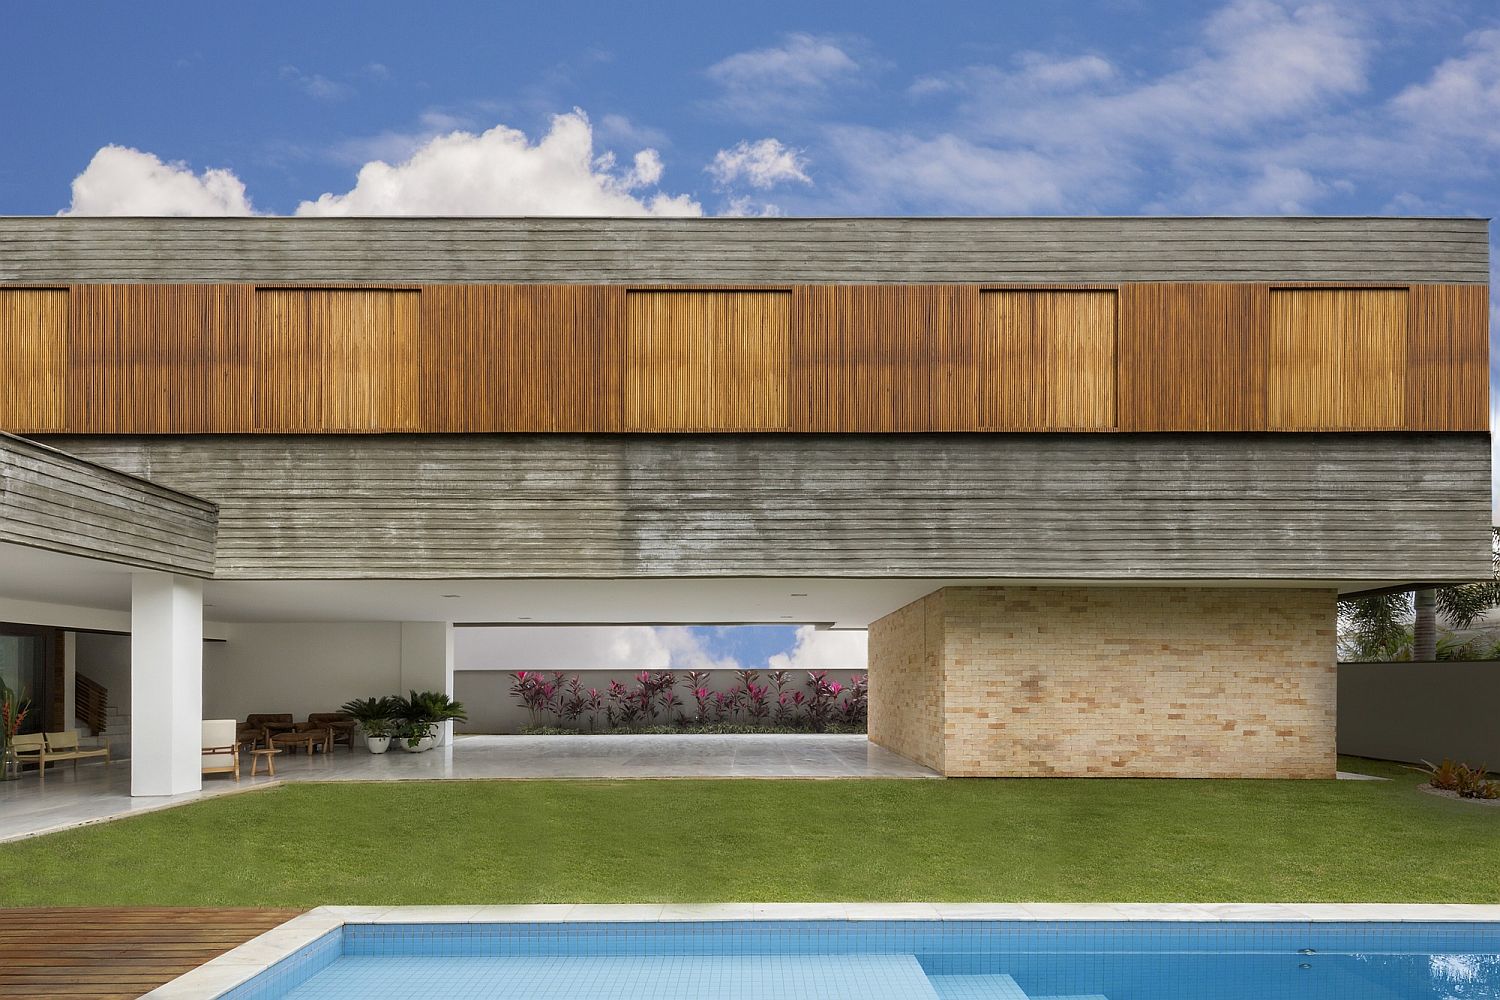 Sweeping yard and pool area of the L-shaped contemporary home in Brazil